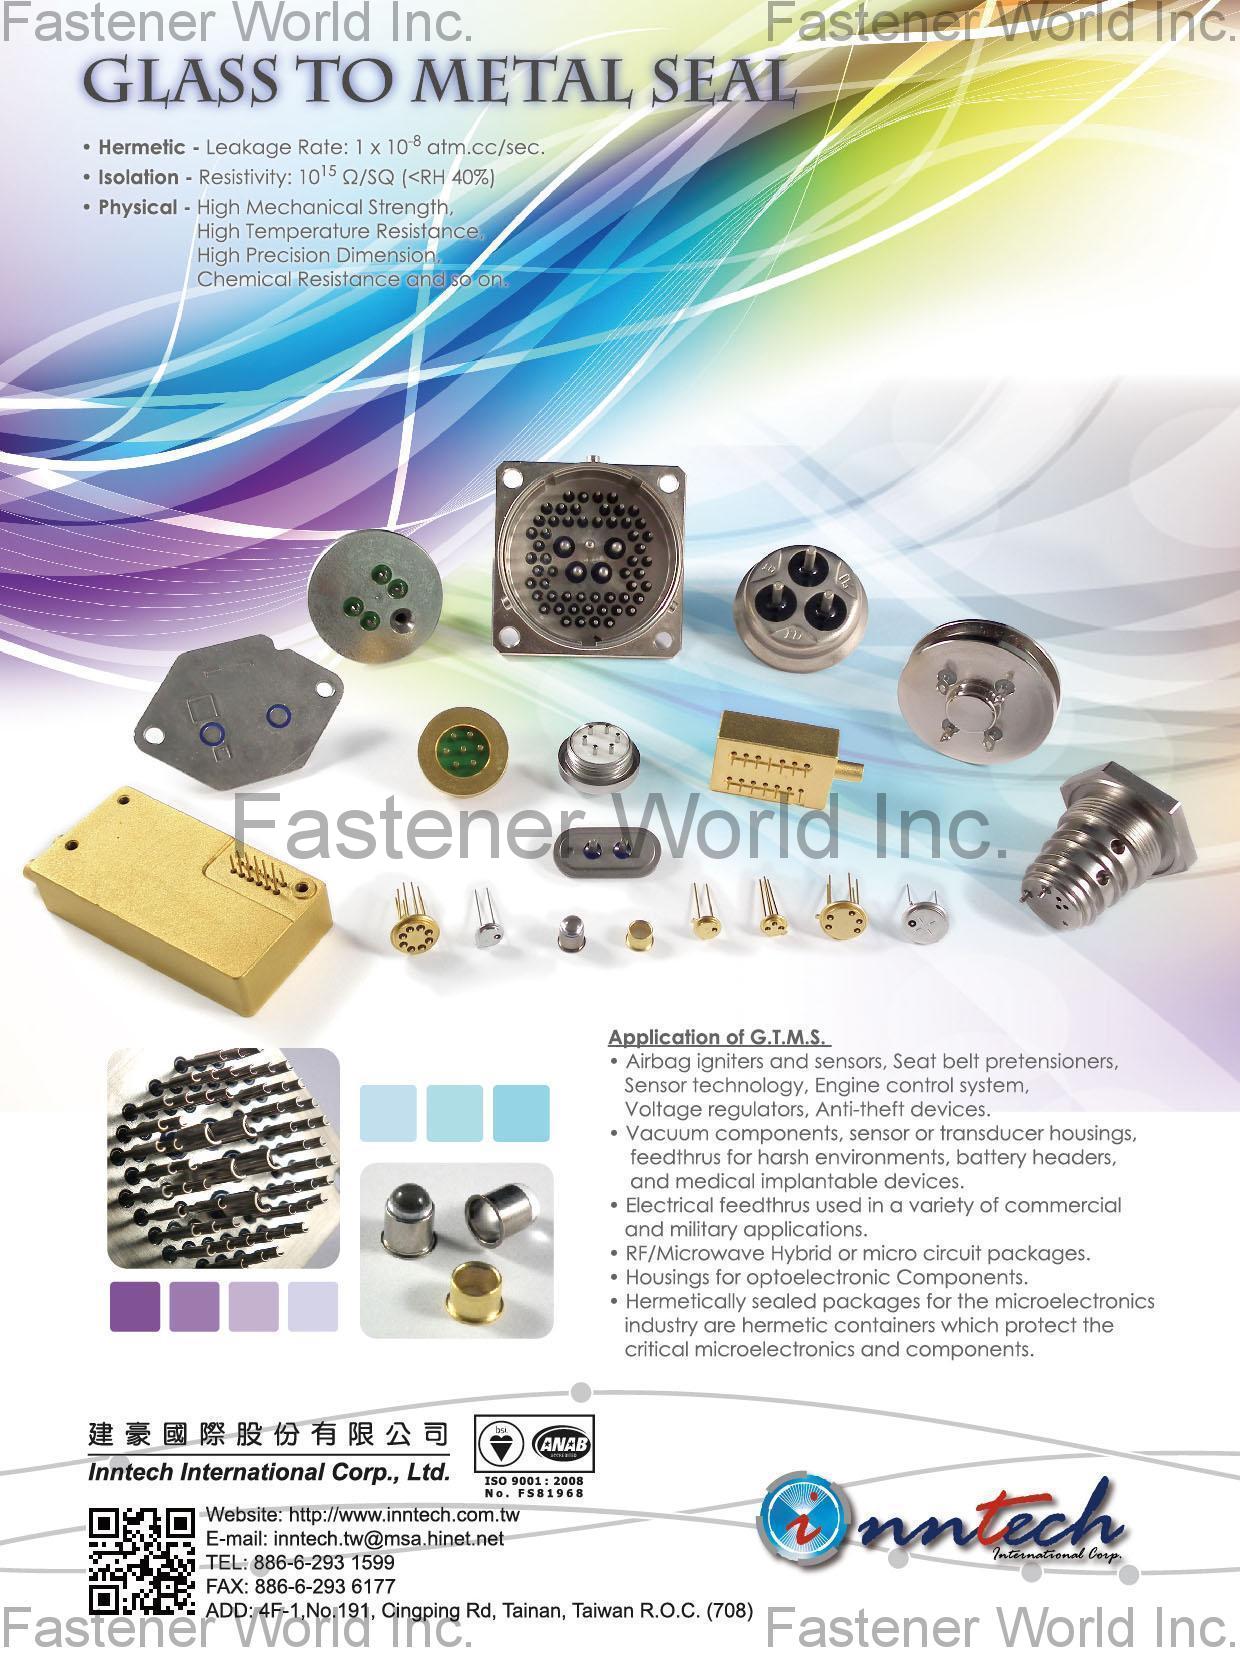 INNTECH INTERNATIONAL CO., LTD.  , OEM Quality Fasteners, Precision Turning, Metal Stamping, Patent, Open Die, Casting, Plastic Injection Molding, Metal Injection Molding, Powder Metal, Glass To Metal Seal, Wire Form, Second Operation, Spring, Assembly , Mechanical Seals And Parts